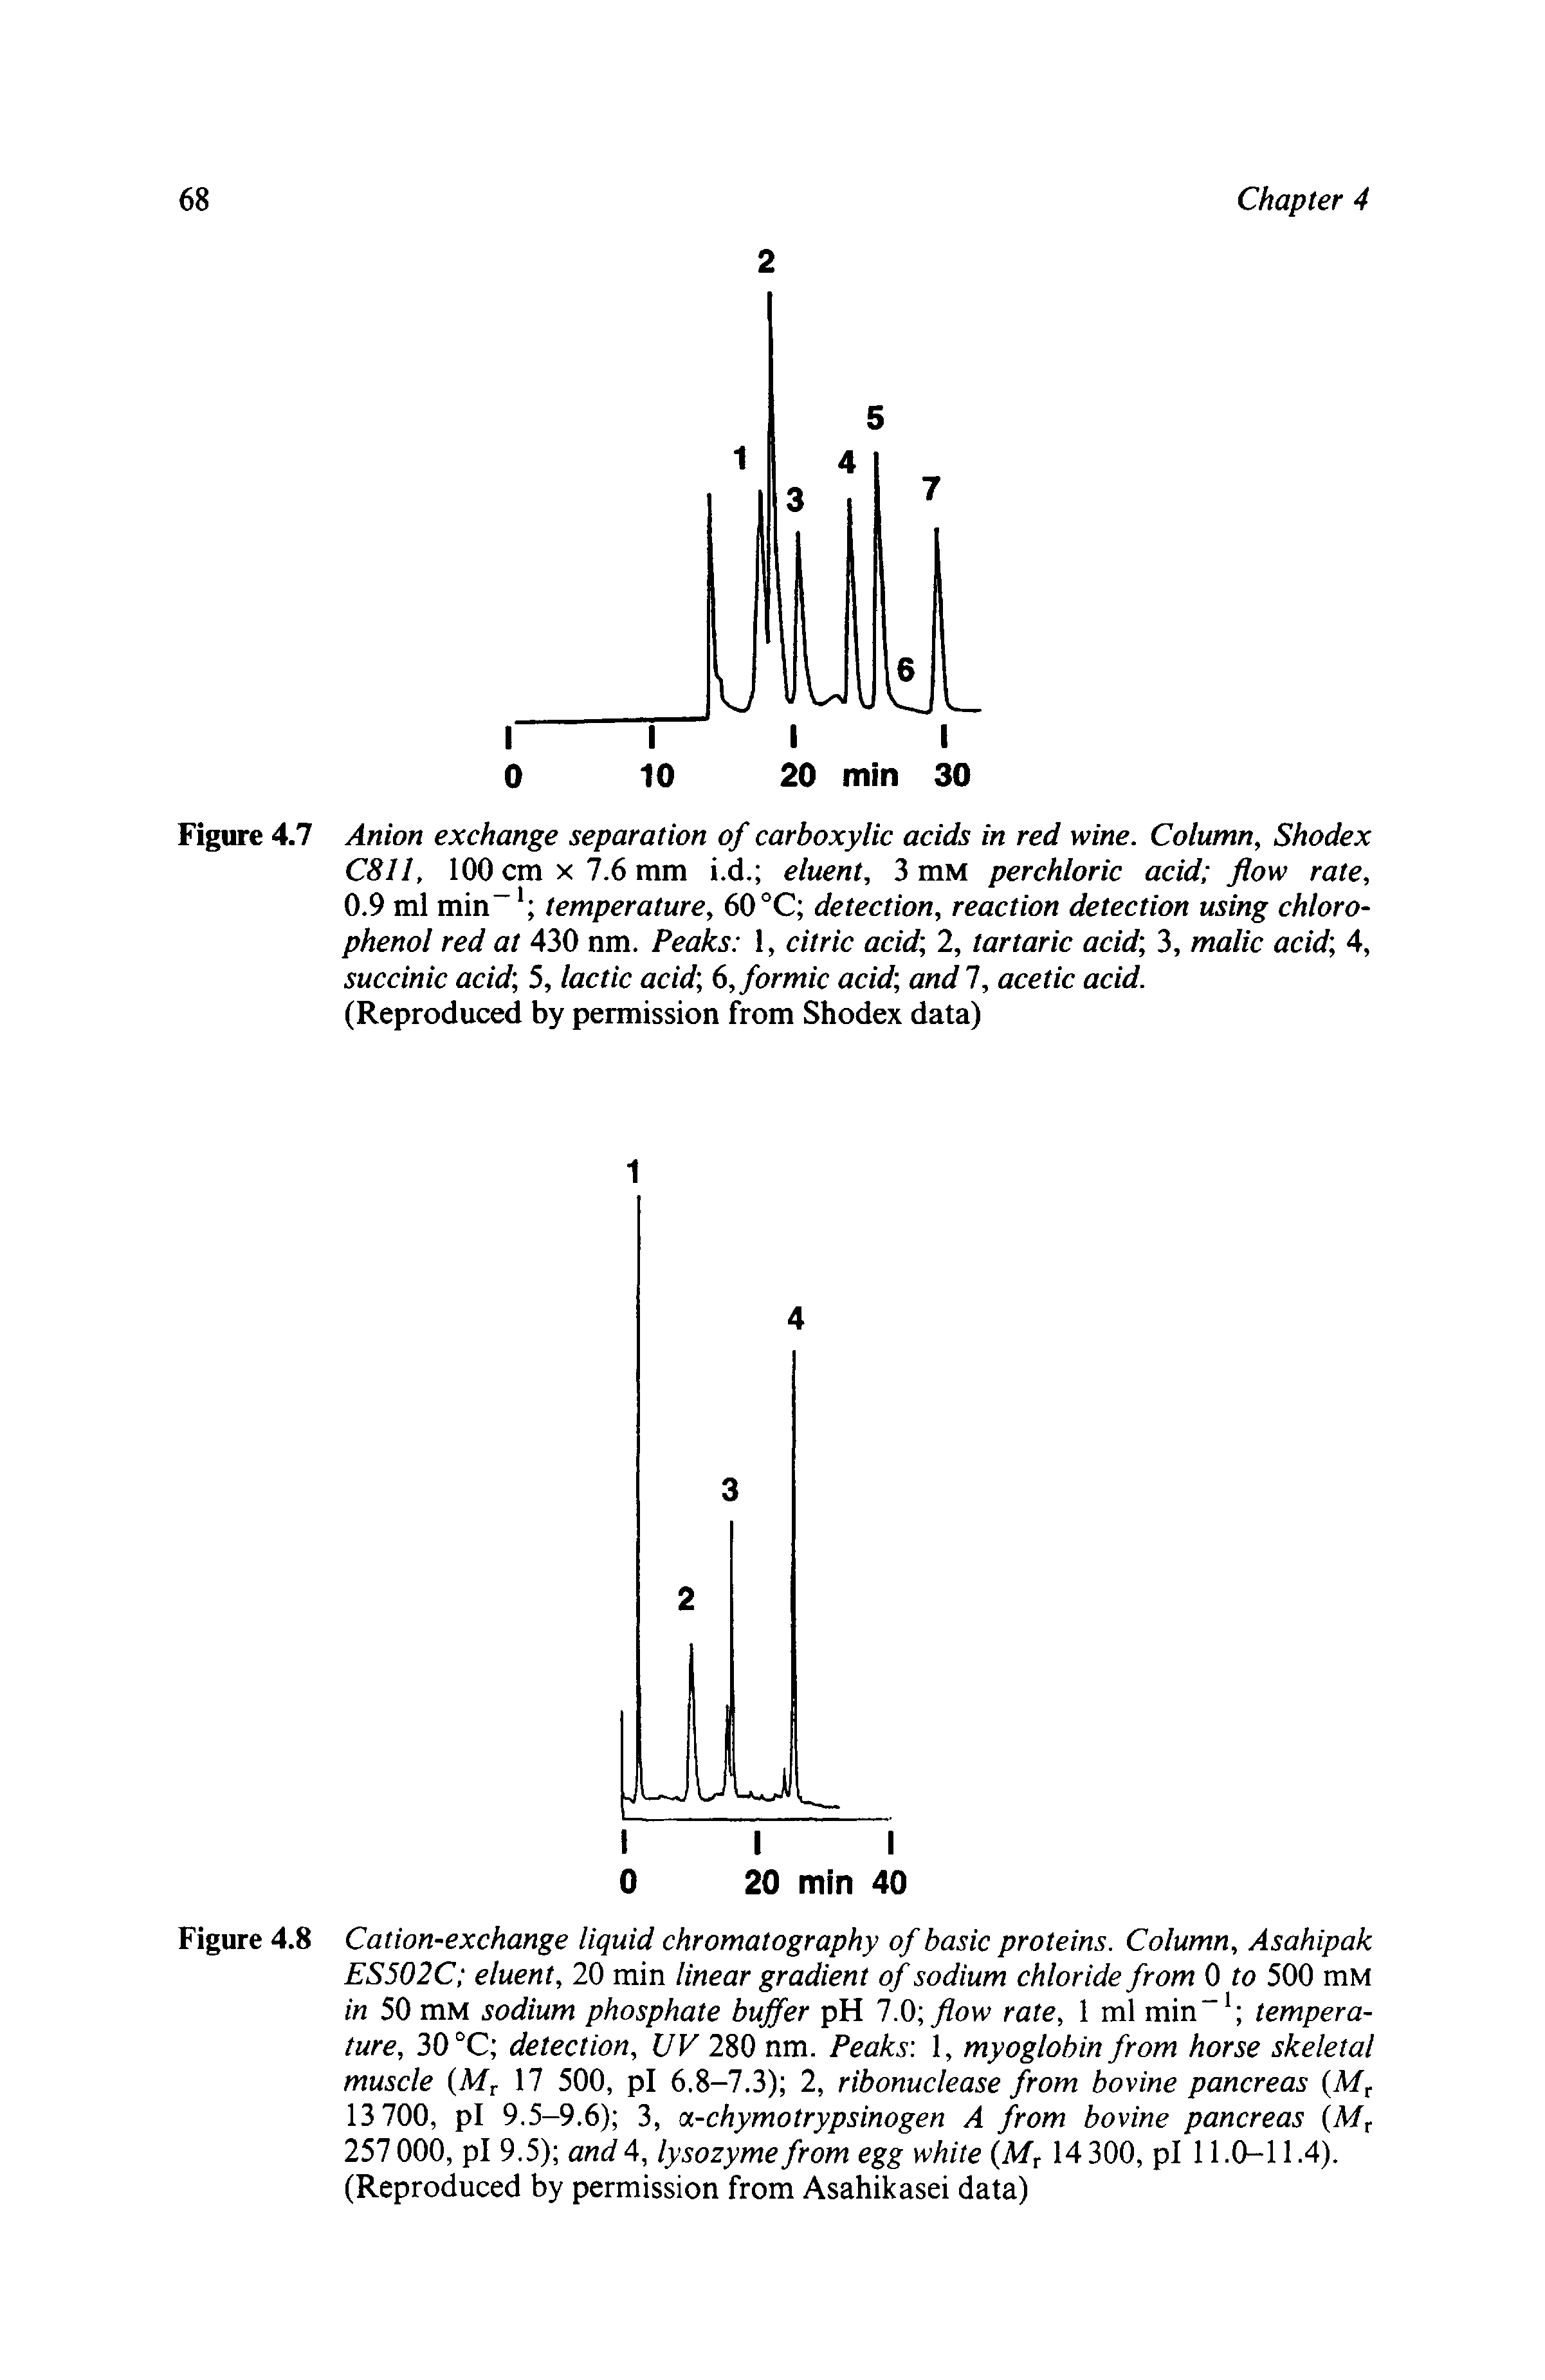 Figure 4.8 Cation-exchange liquid chromatography of basic proteins. Column, Asahipak ES502C eluent, 20 min linear gradient of sodium chloride from 0 to 500 mM in 50 mM sodium phosphate buffer pH 7.0 flow rate, 1 ml min-1 temperature, 30 °C detection, UV 280 nm. Peaks 1, myoglobin from horse skeletal muscle (Mr 17 500, pi 6.8-7.3) 2, ribonuclease from bovine pancreas (Mr 13 700, pi 9.5-9.6) 3, a-chymotrypsinogen A from bovine pancreas (Mr 257 000, pi 9.5) and 4, lysozyme from egg white (Mr 14 300, pi 11.0-11.4). (Reproduced by permission from Asahikasei data)...